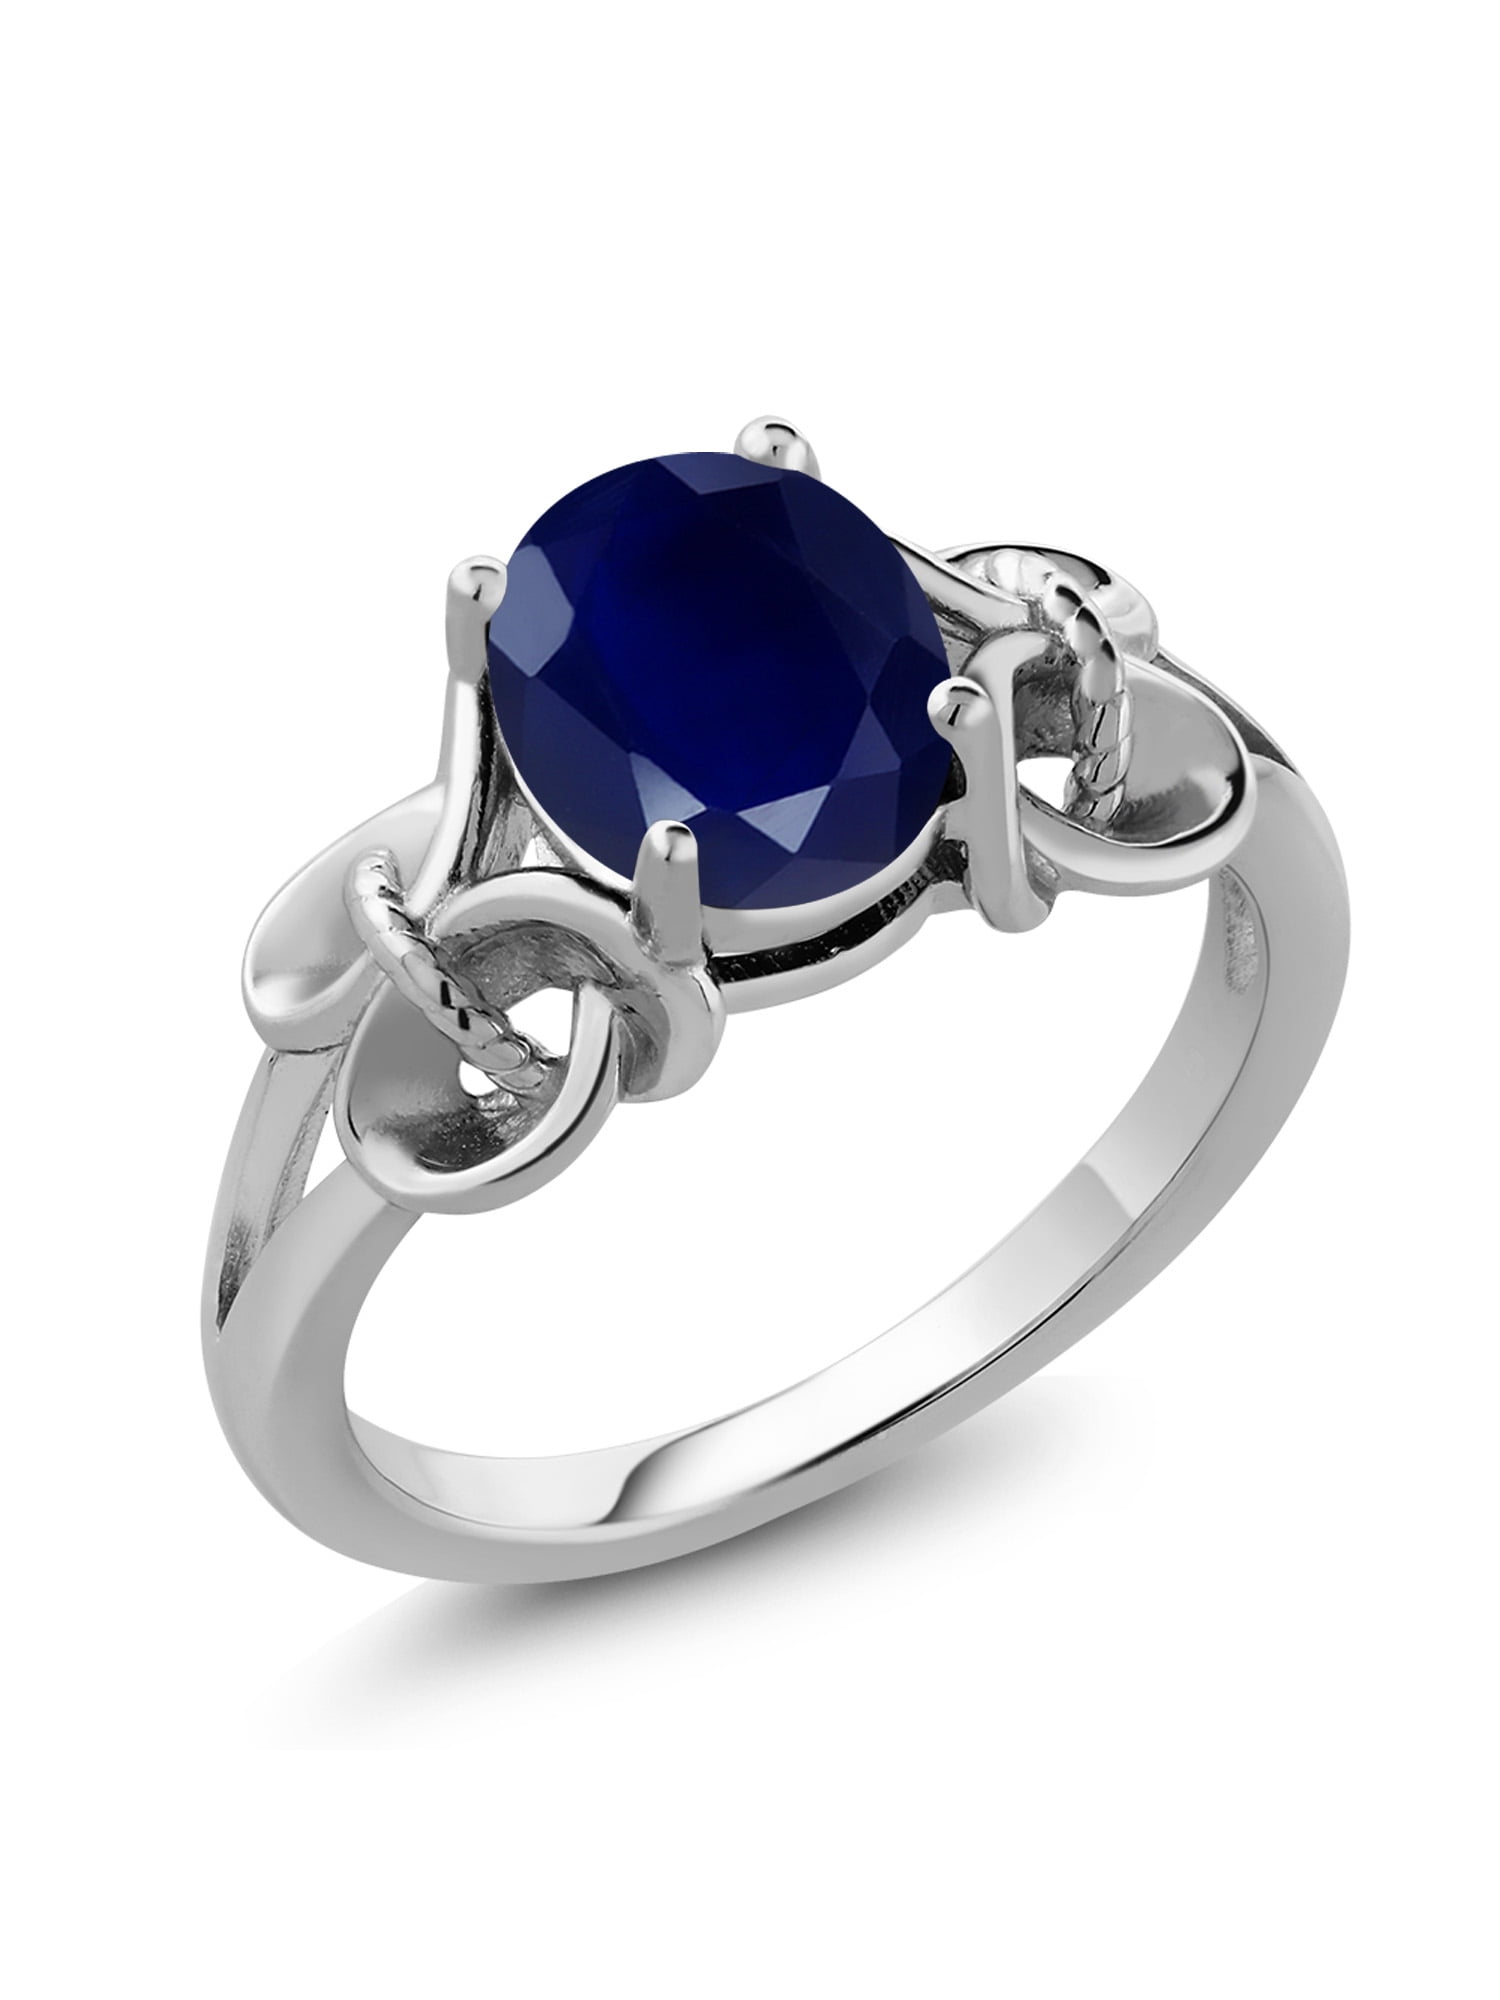 Gem Stone King 925 Sterling Silver Blue Sapphire Women's Ring (2.50 Ct  Oval, Gemstone Birthstone, Available 5,6,7,8,9)